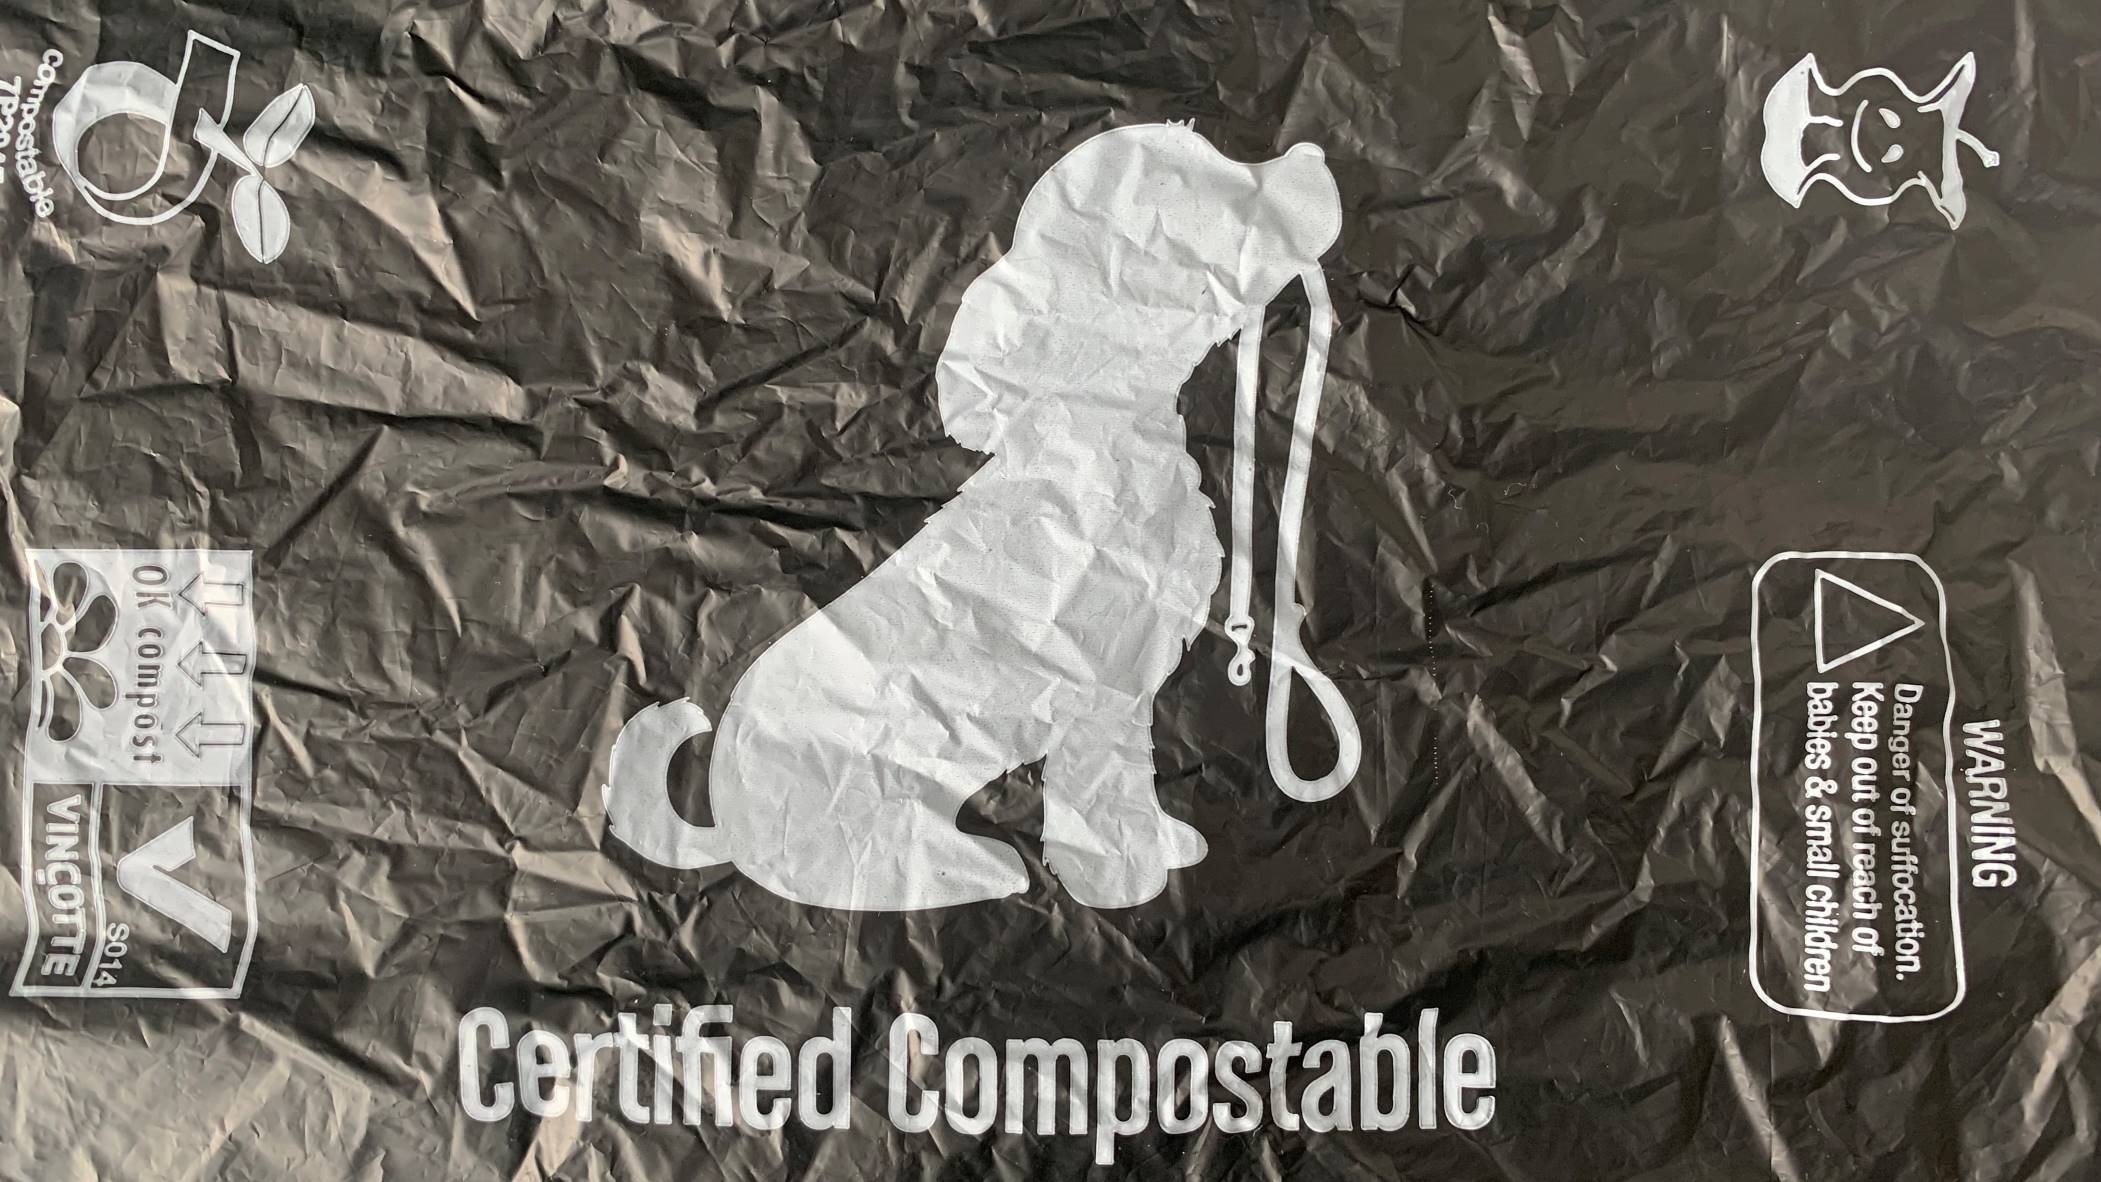 Photo shows compostable dog poo bag. It's printed with a dog holding a lead, eco-symbols and the words 